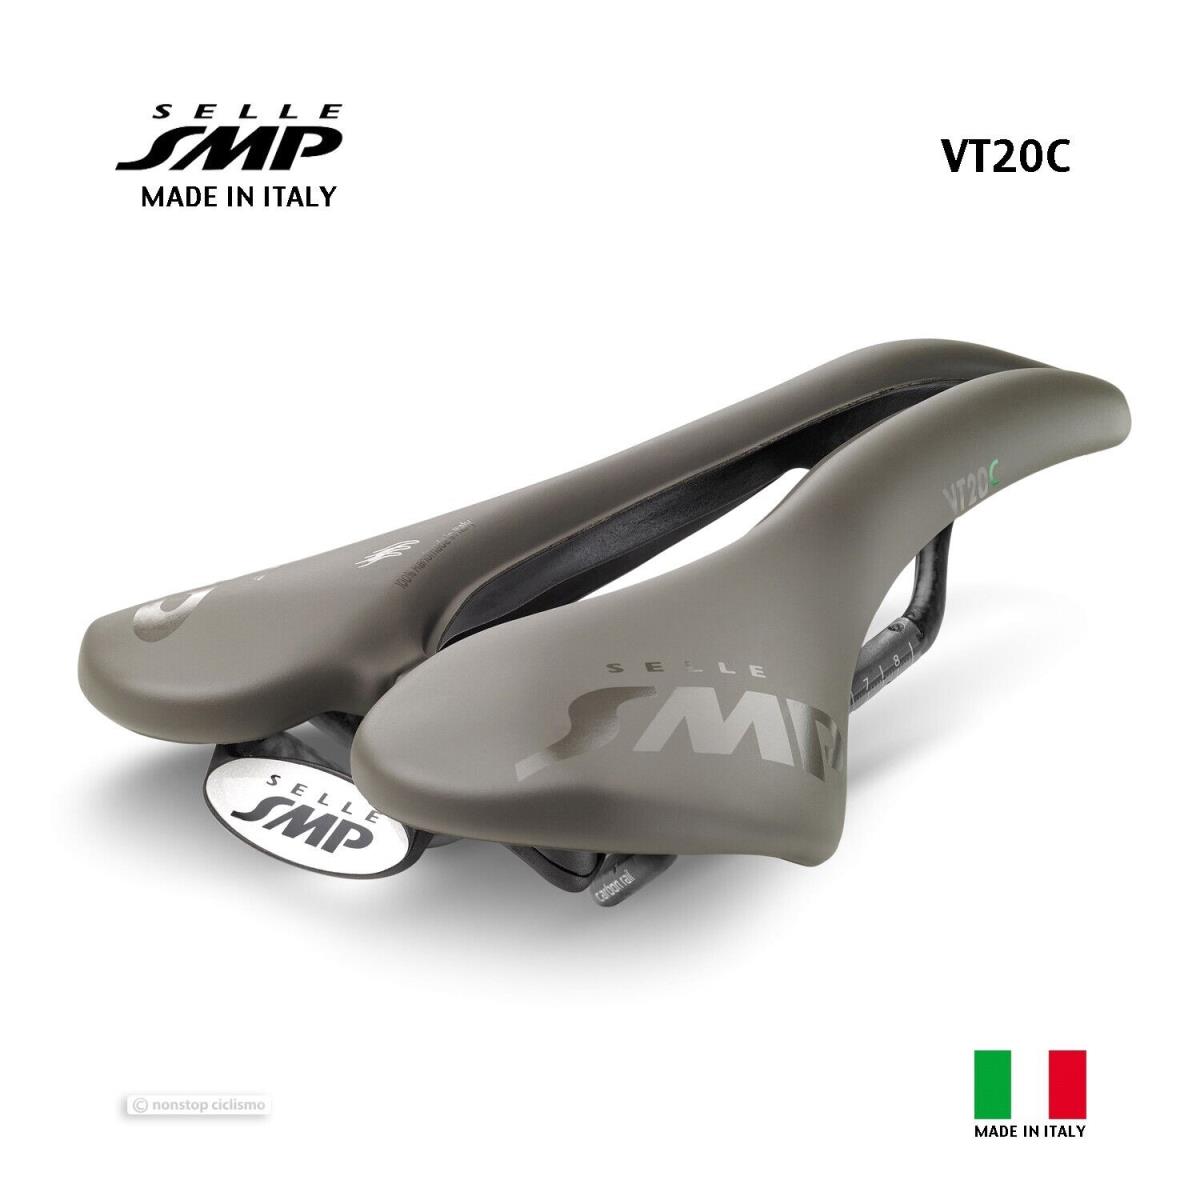 Selle Smp VT20C Saddle : Grey-brown - Made IN Italy